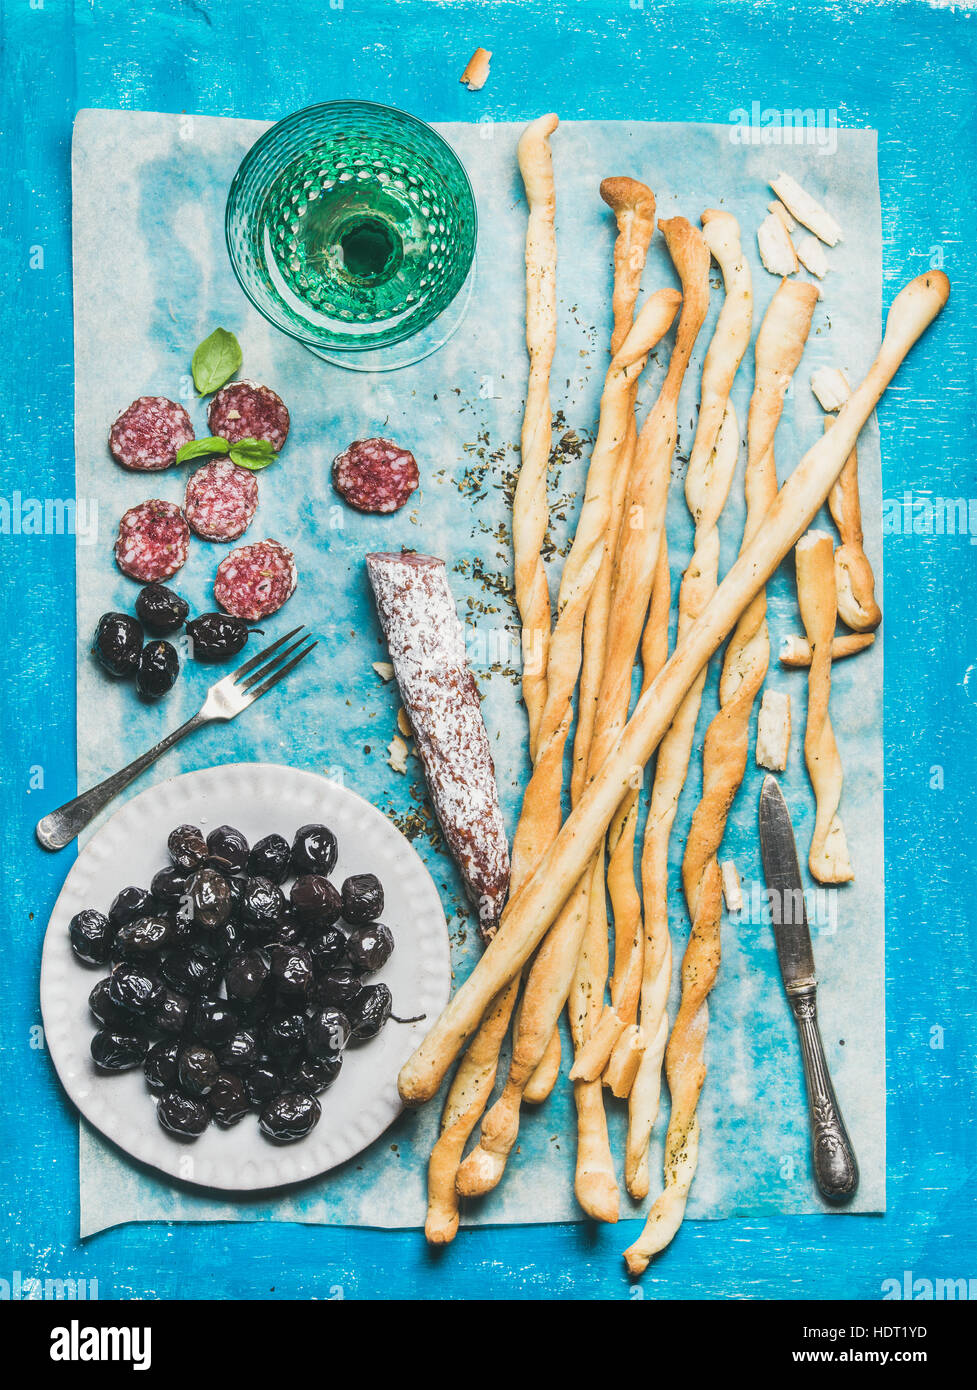 Grissini bread sticks, sausage, olives and white wine, blue background Stock Photo